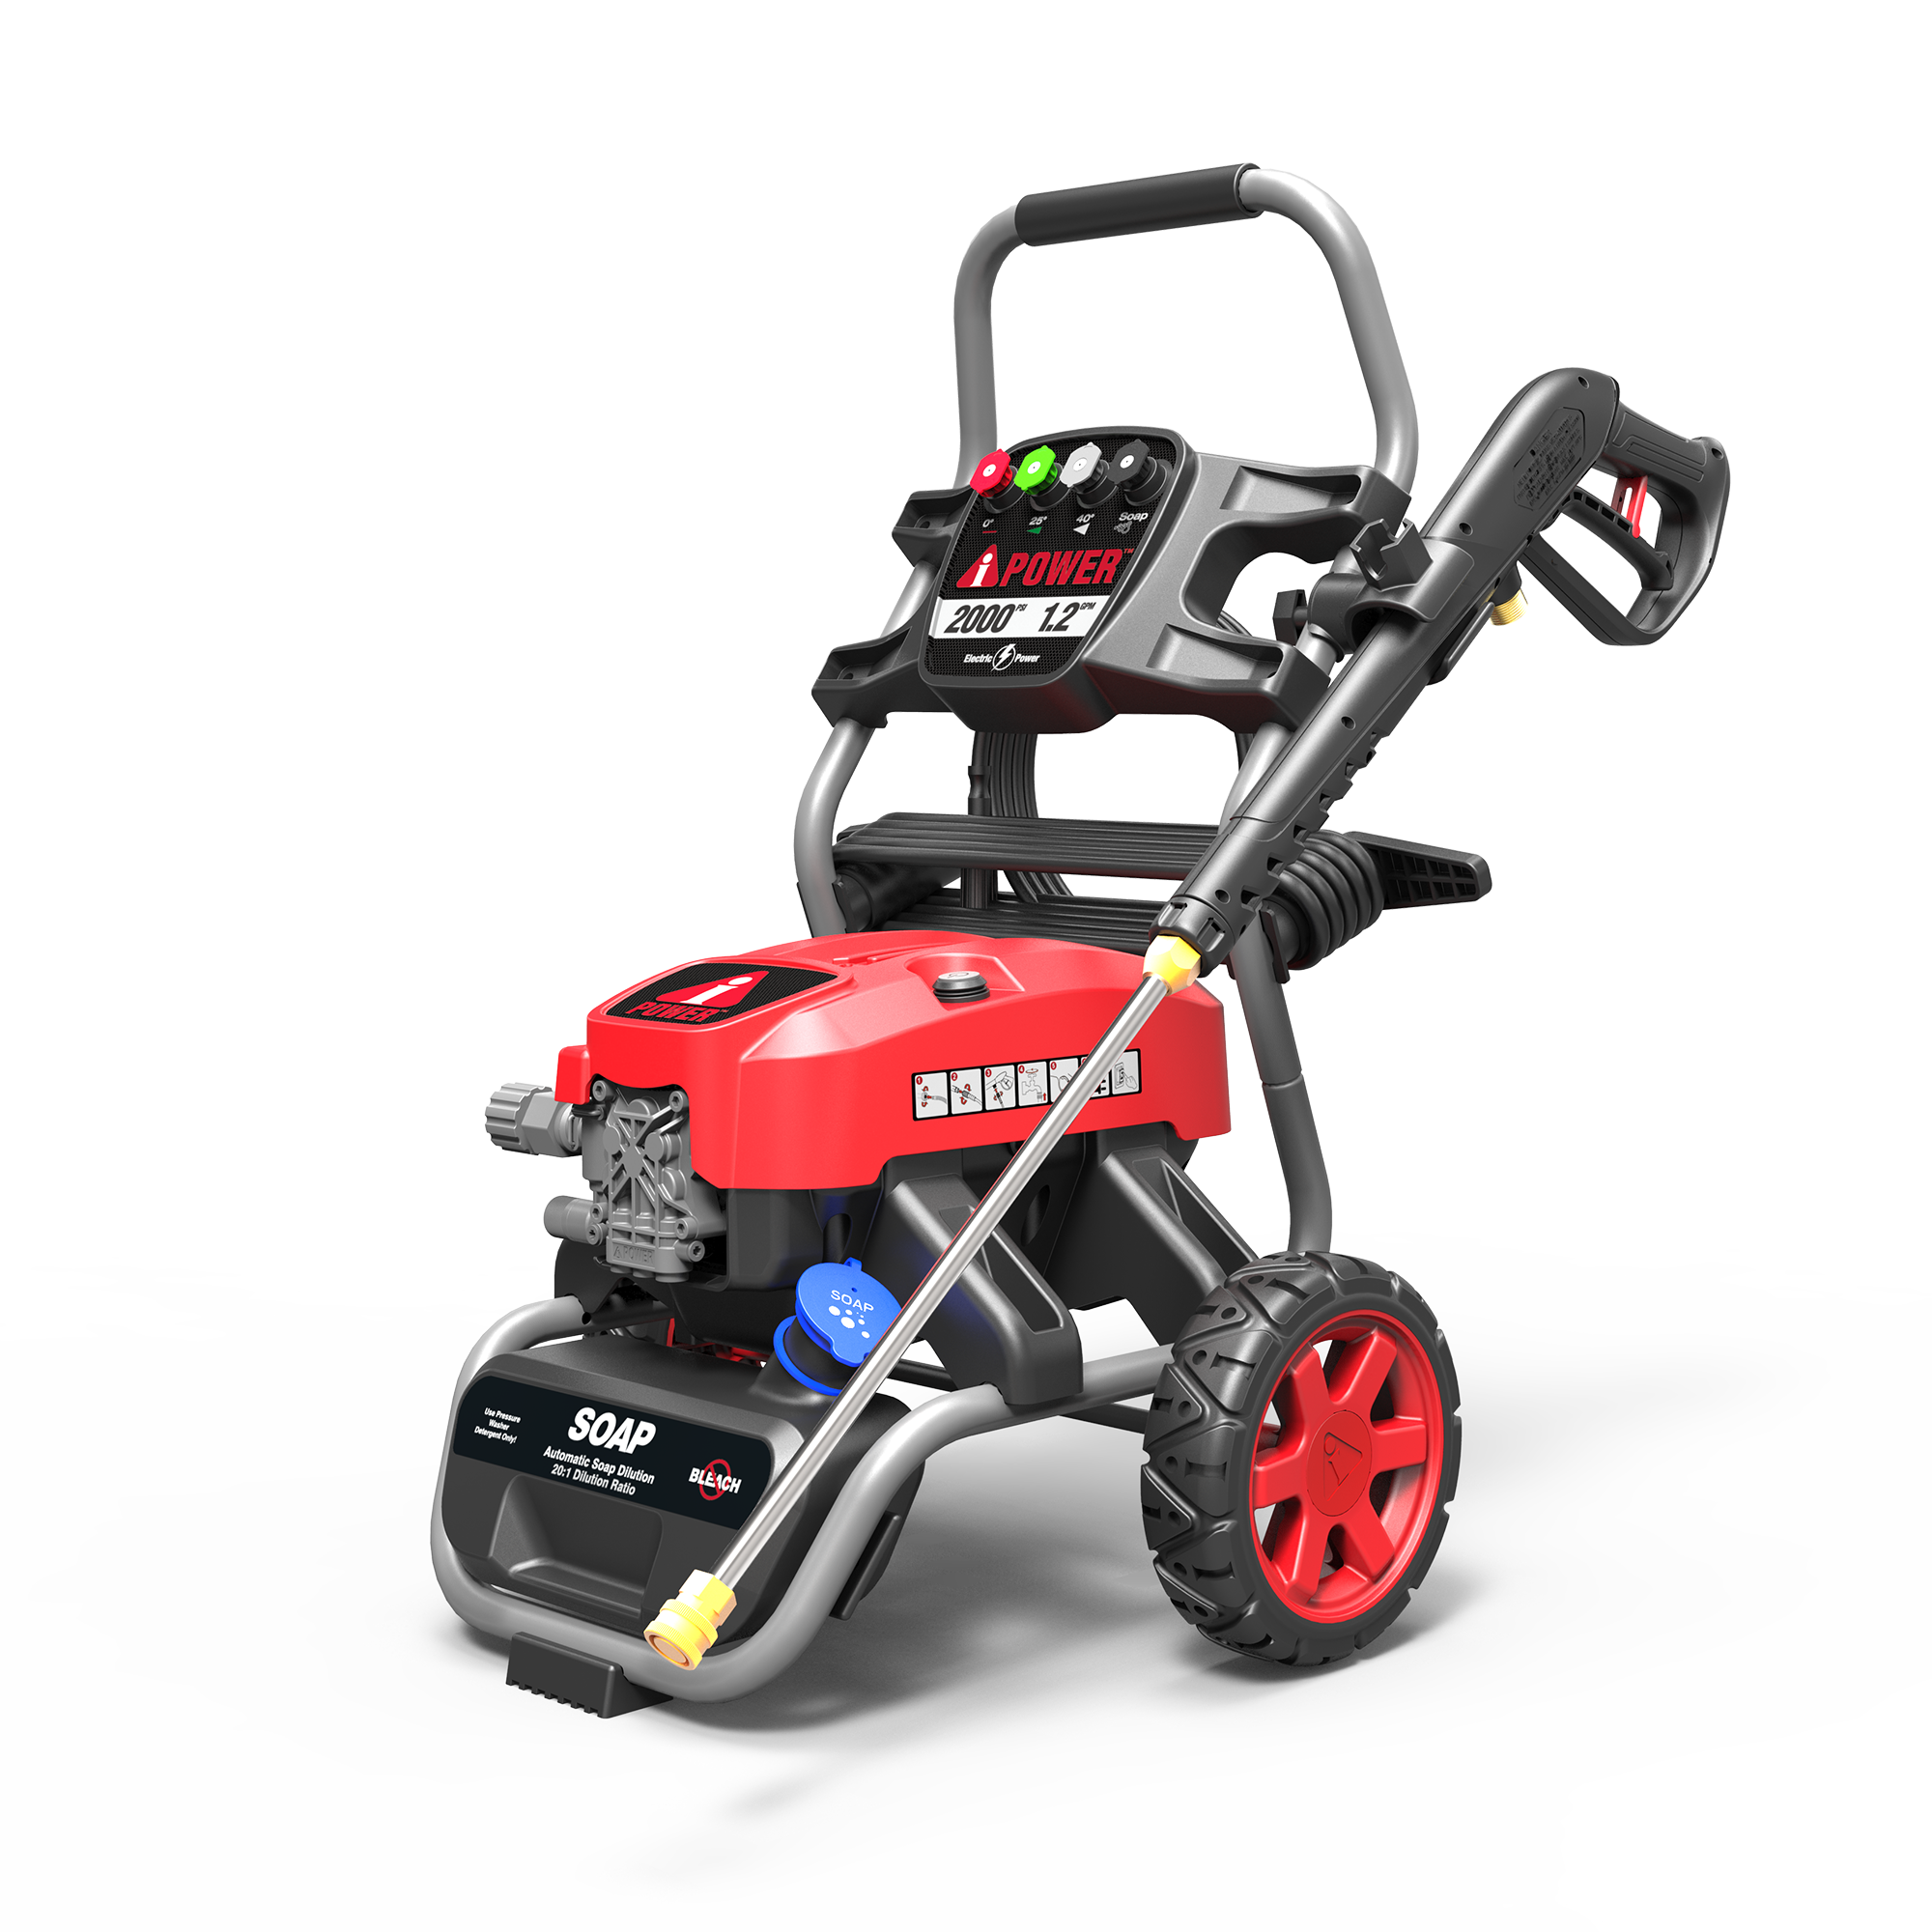 PWE2000 Electric<br> Pressure Washer